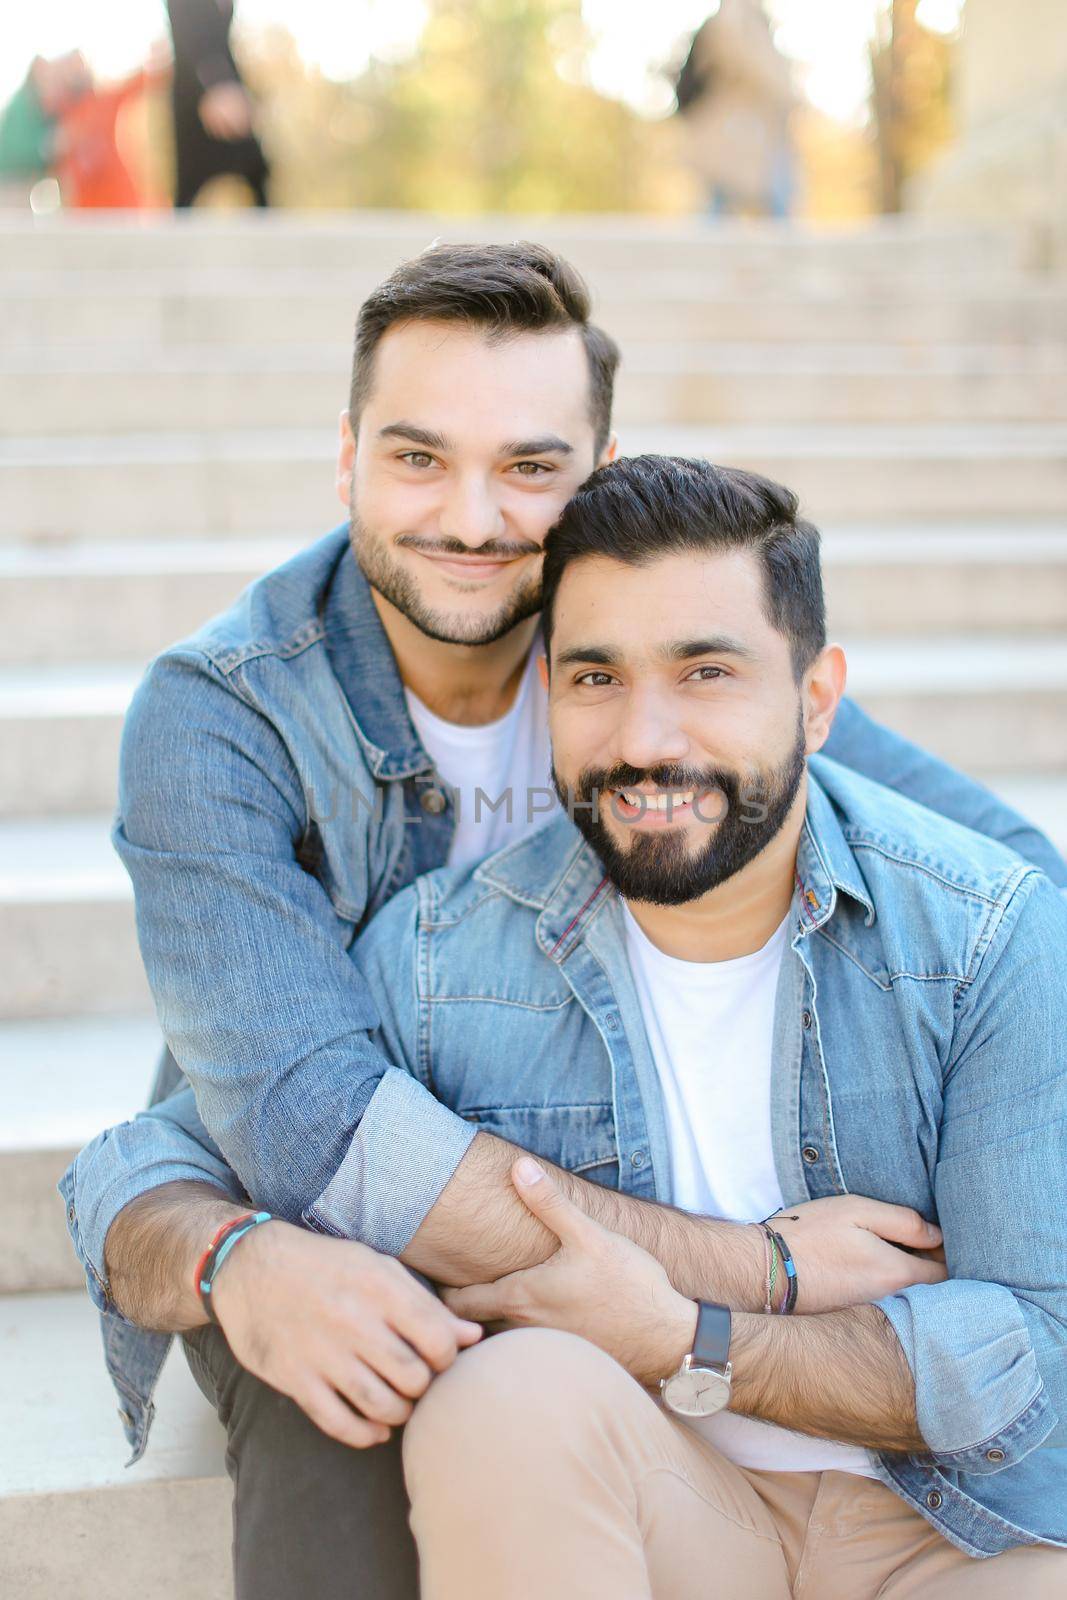 Caucasian handsome european young gays sitting on concrete stairs and hugging, wearing jeans shirts. Concept of same sex couple and lgbt.